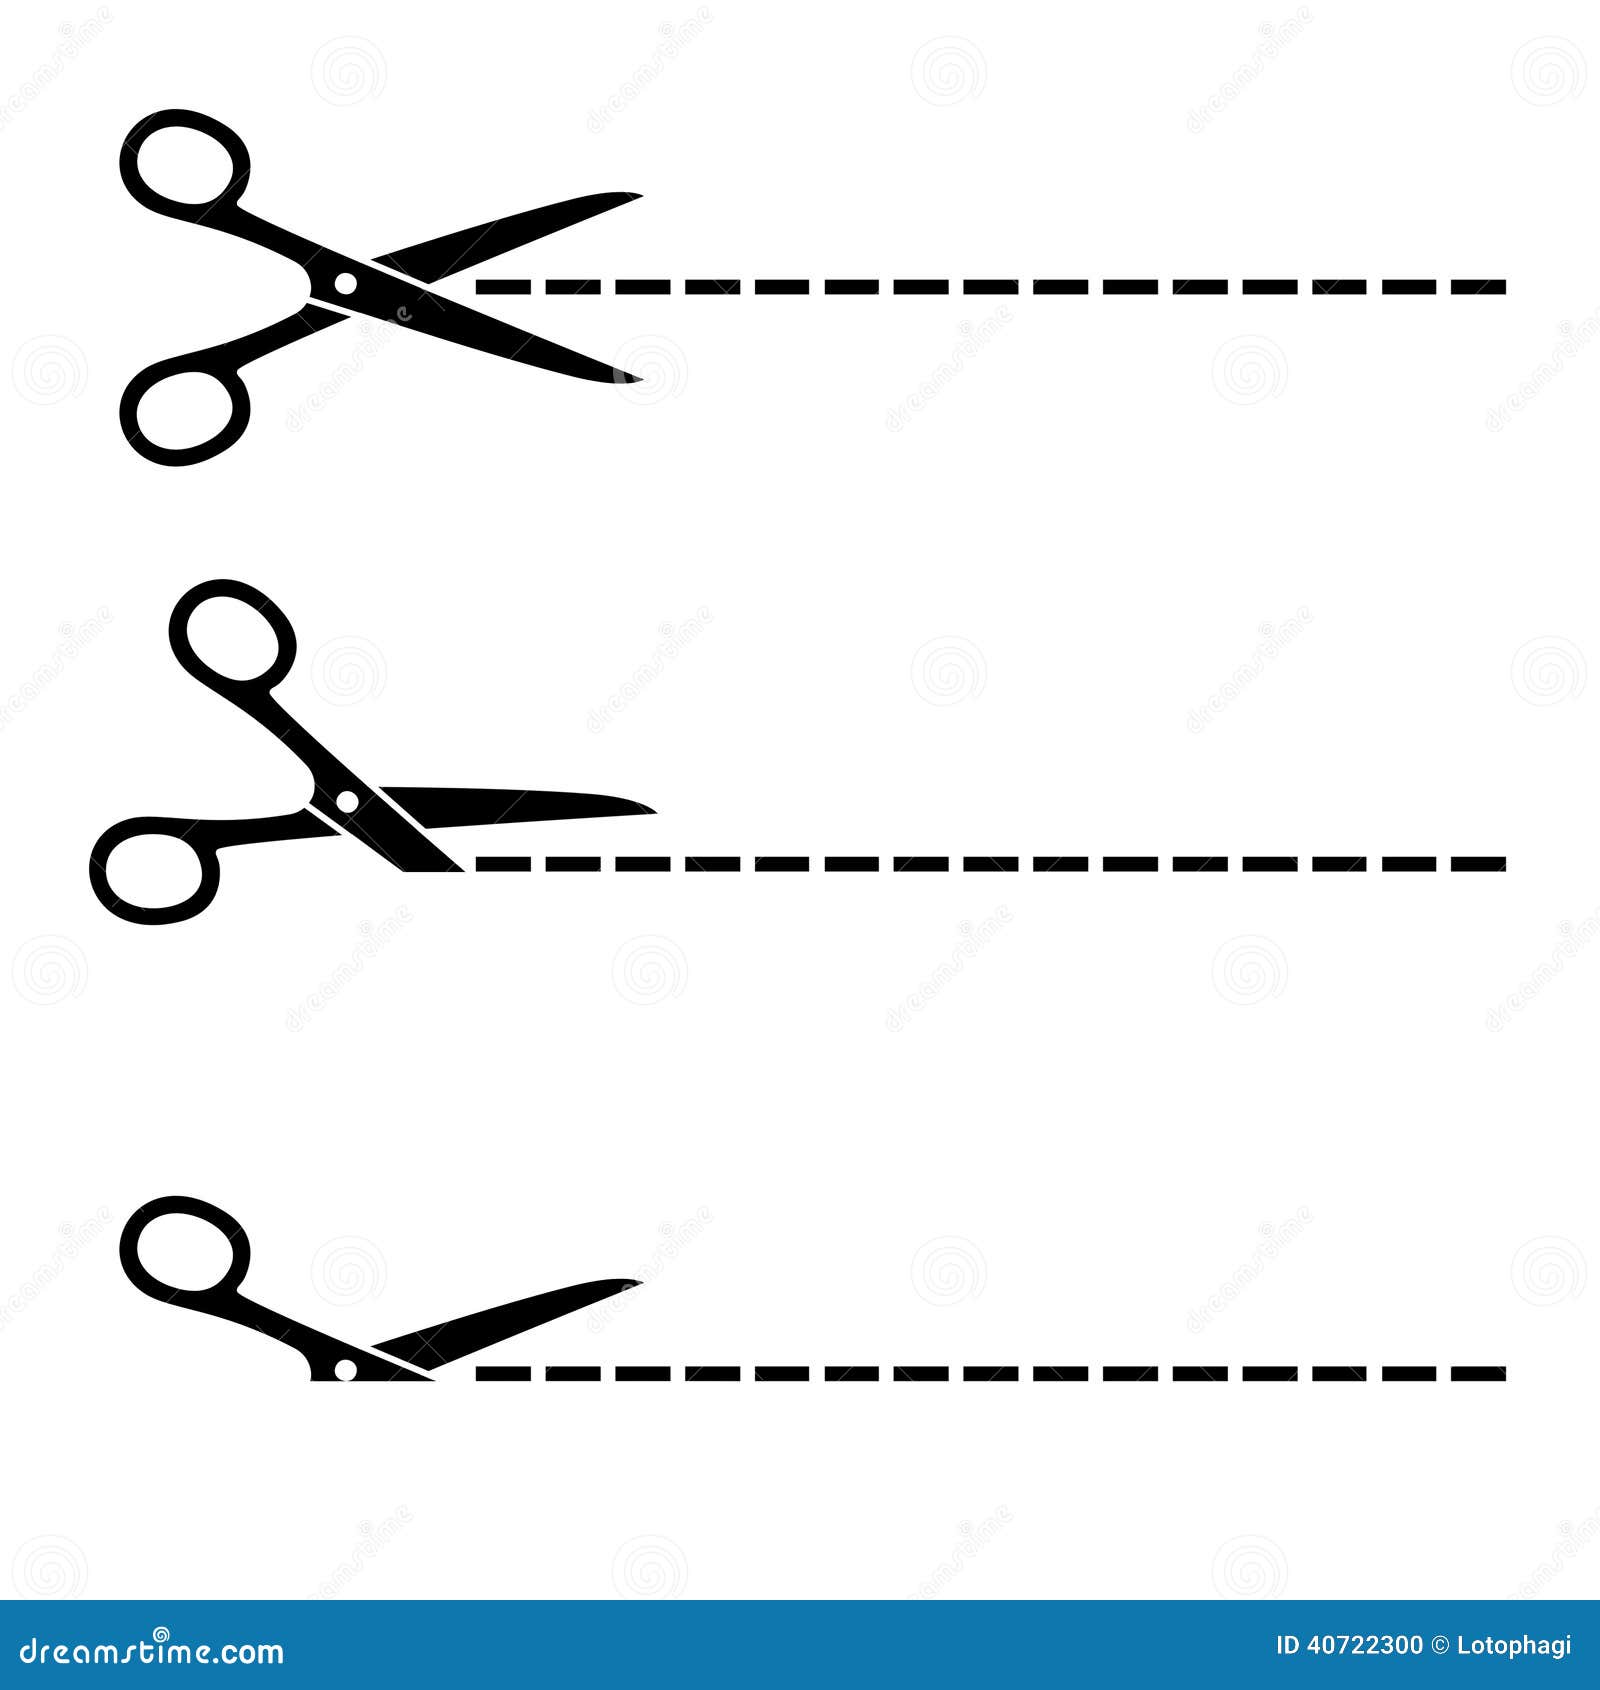 scissors with dotted line clip art - photo #34